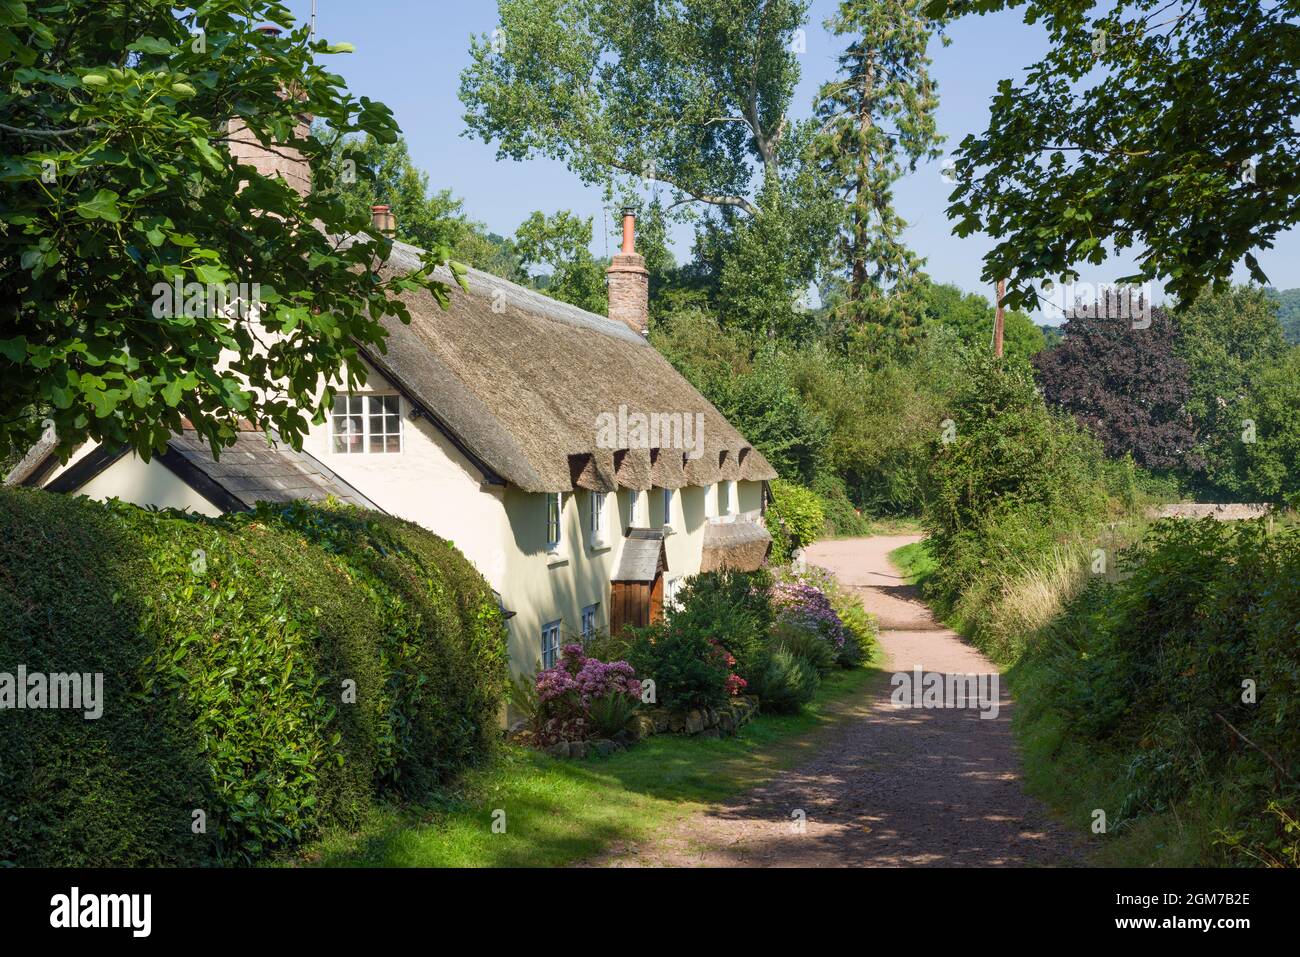 Thatched cottages on Bonniton New Road at Park Gate at the entrance to Dunster Park. Dunster, Exmoor National Park, Somerset, England. Stock Photo